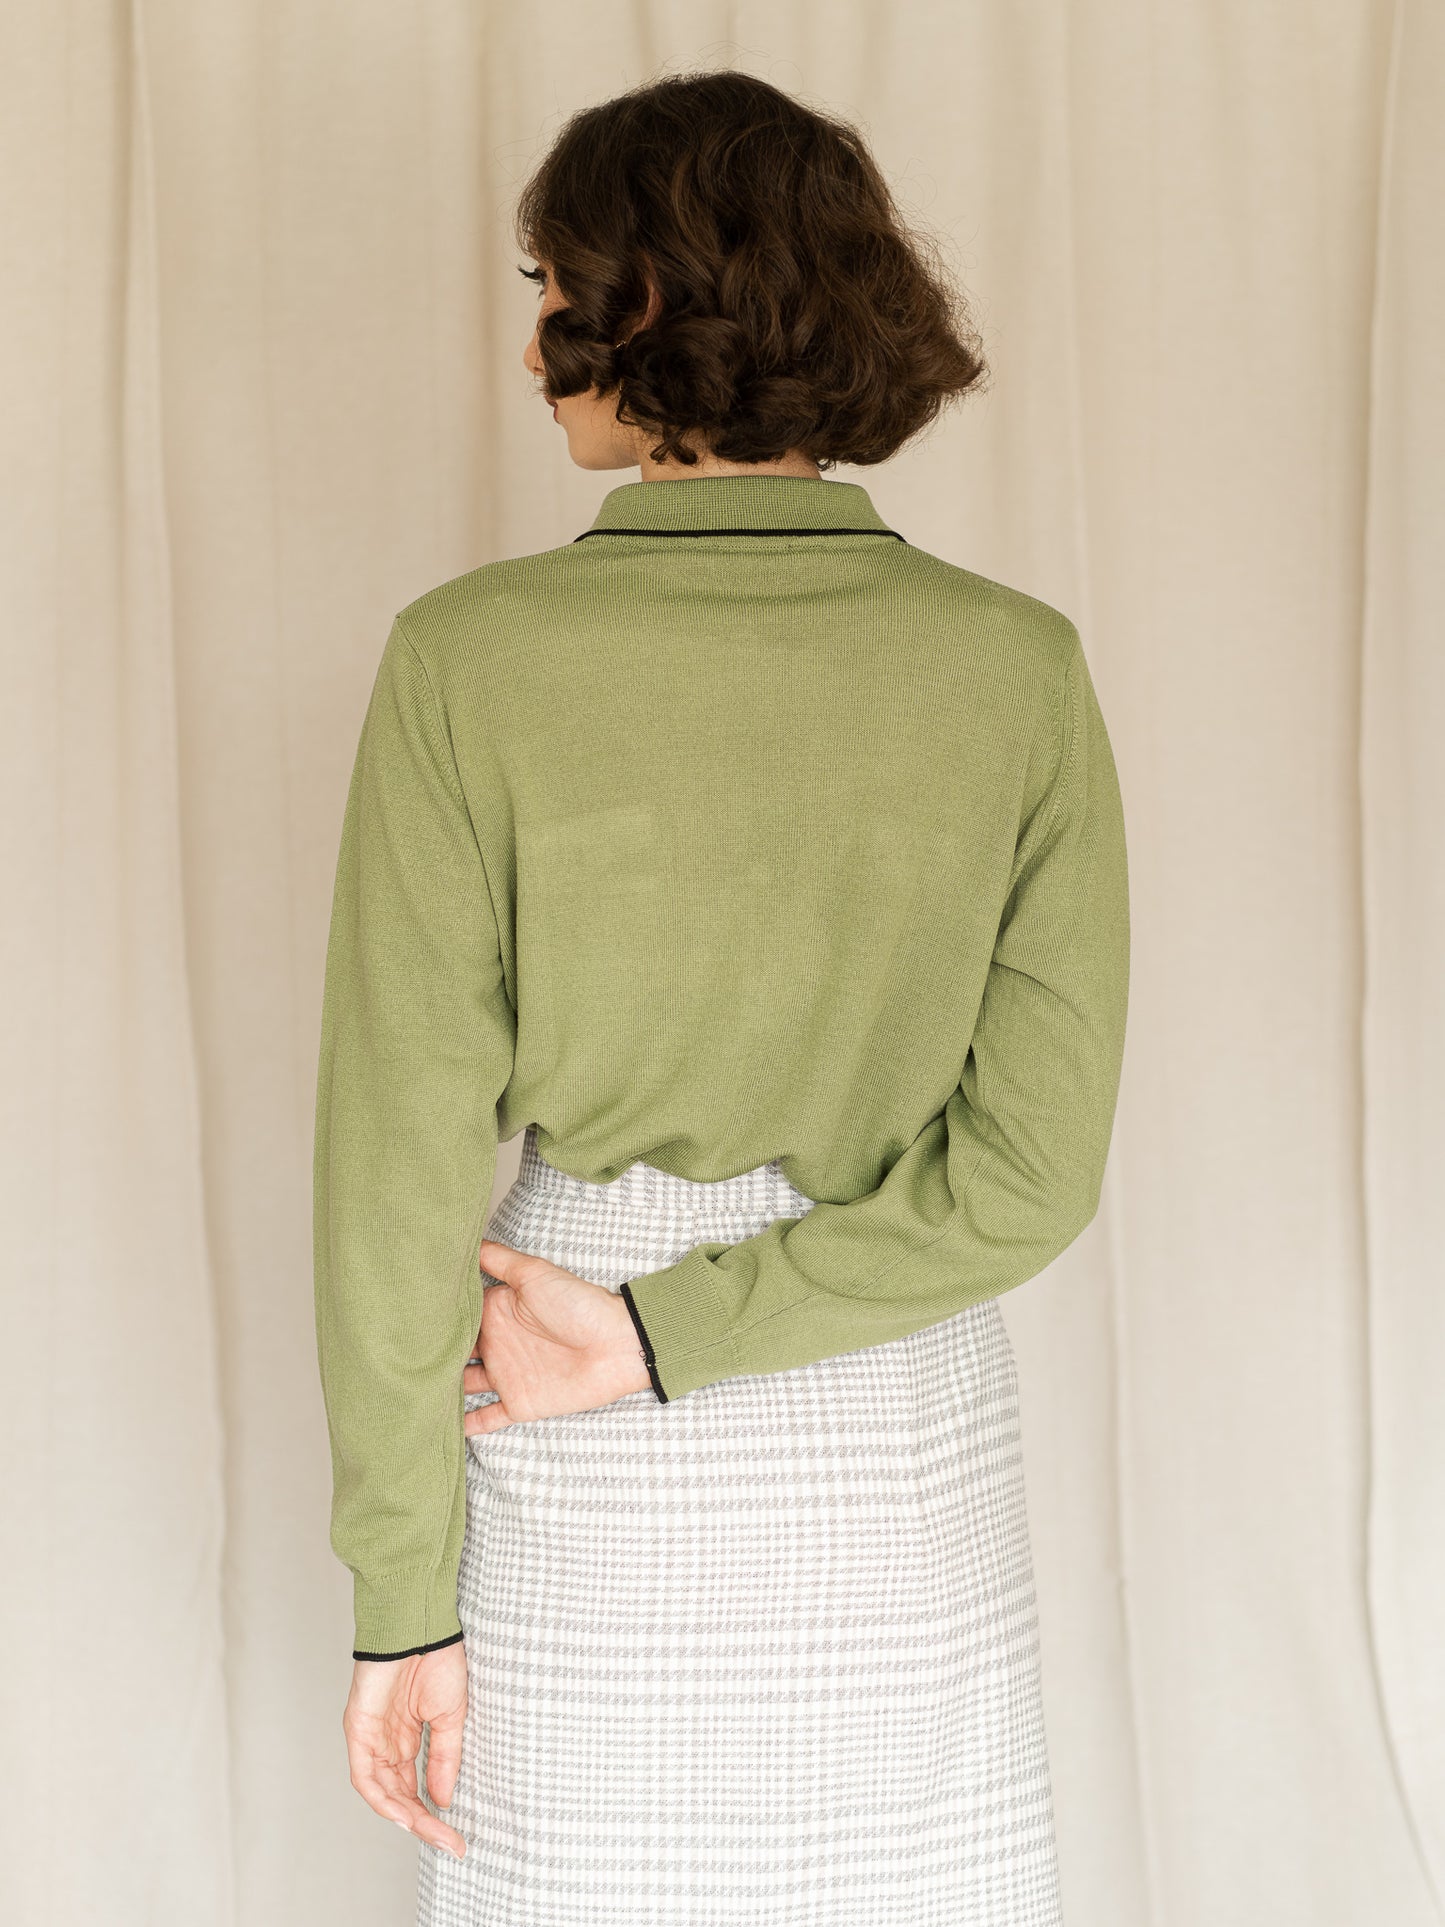 Vintage 90's Green "Blouse Like" Sweater (M)